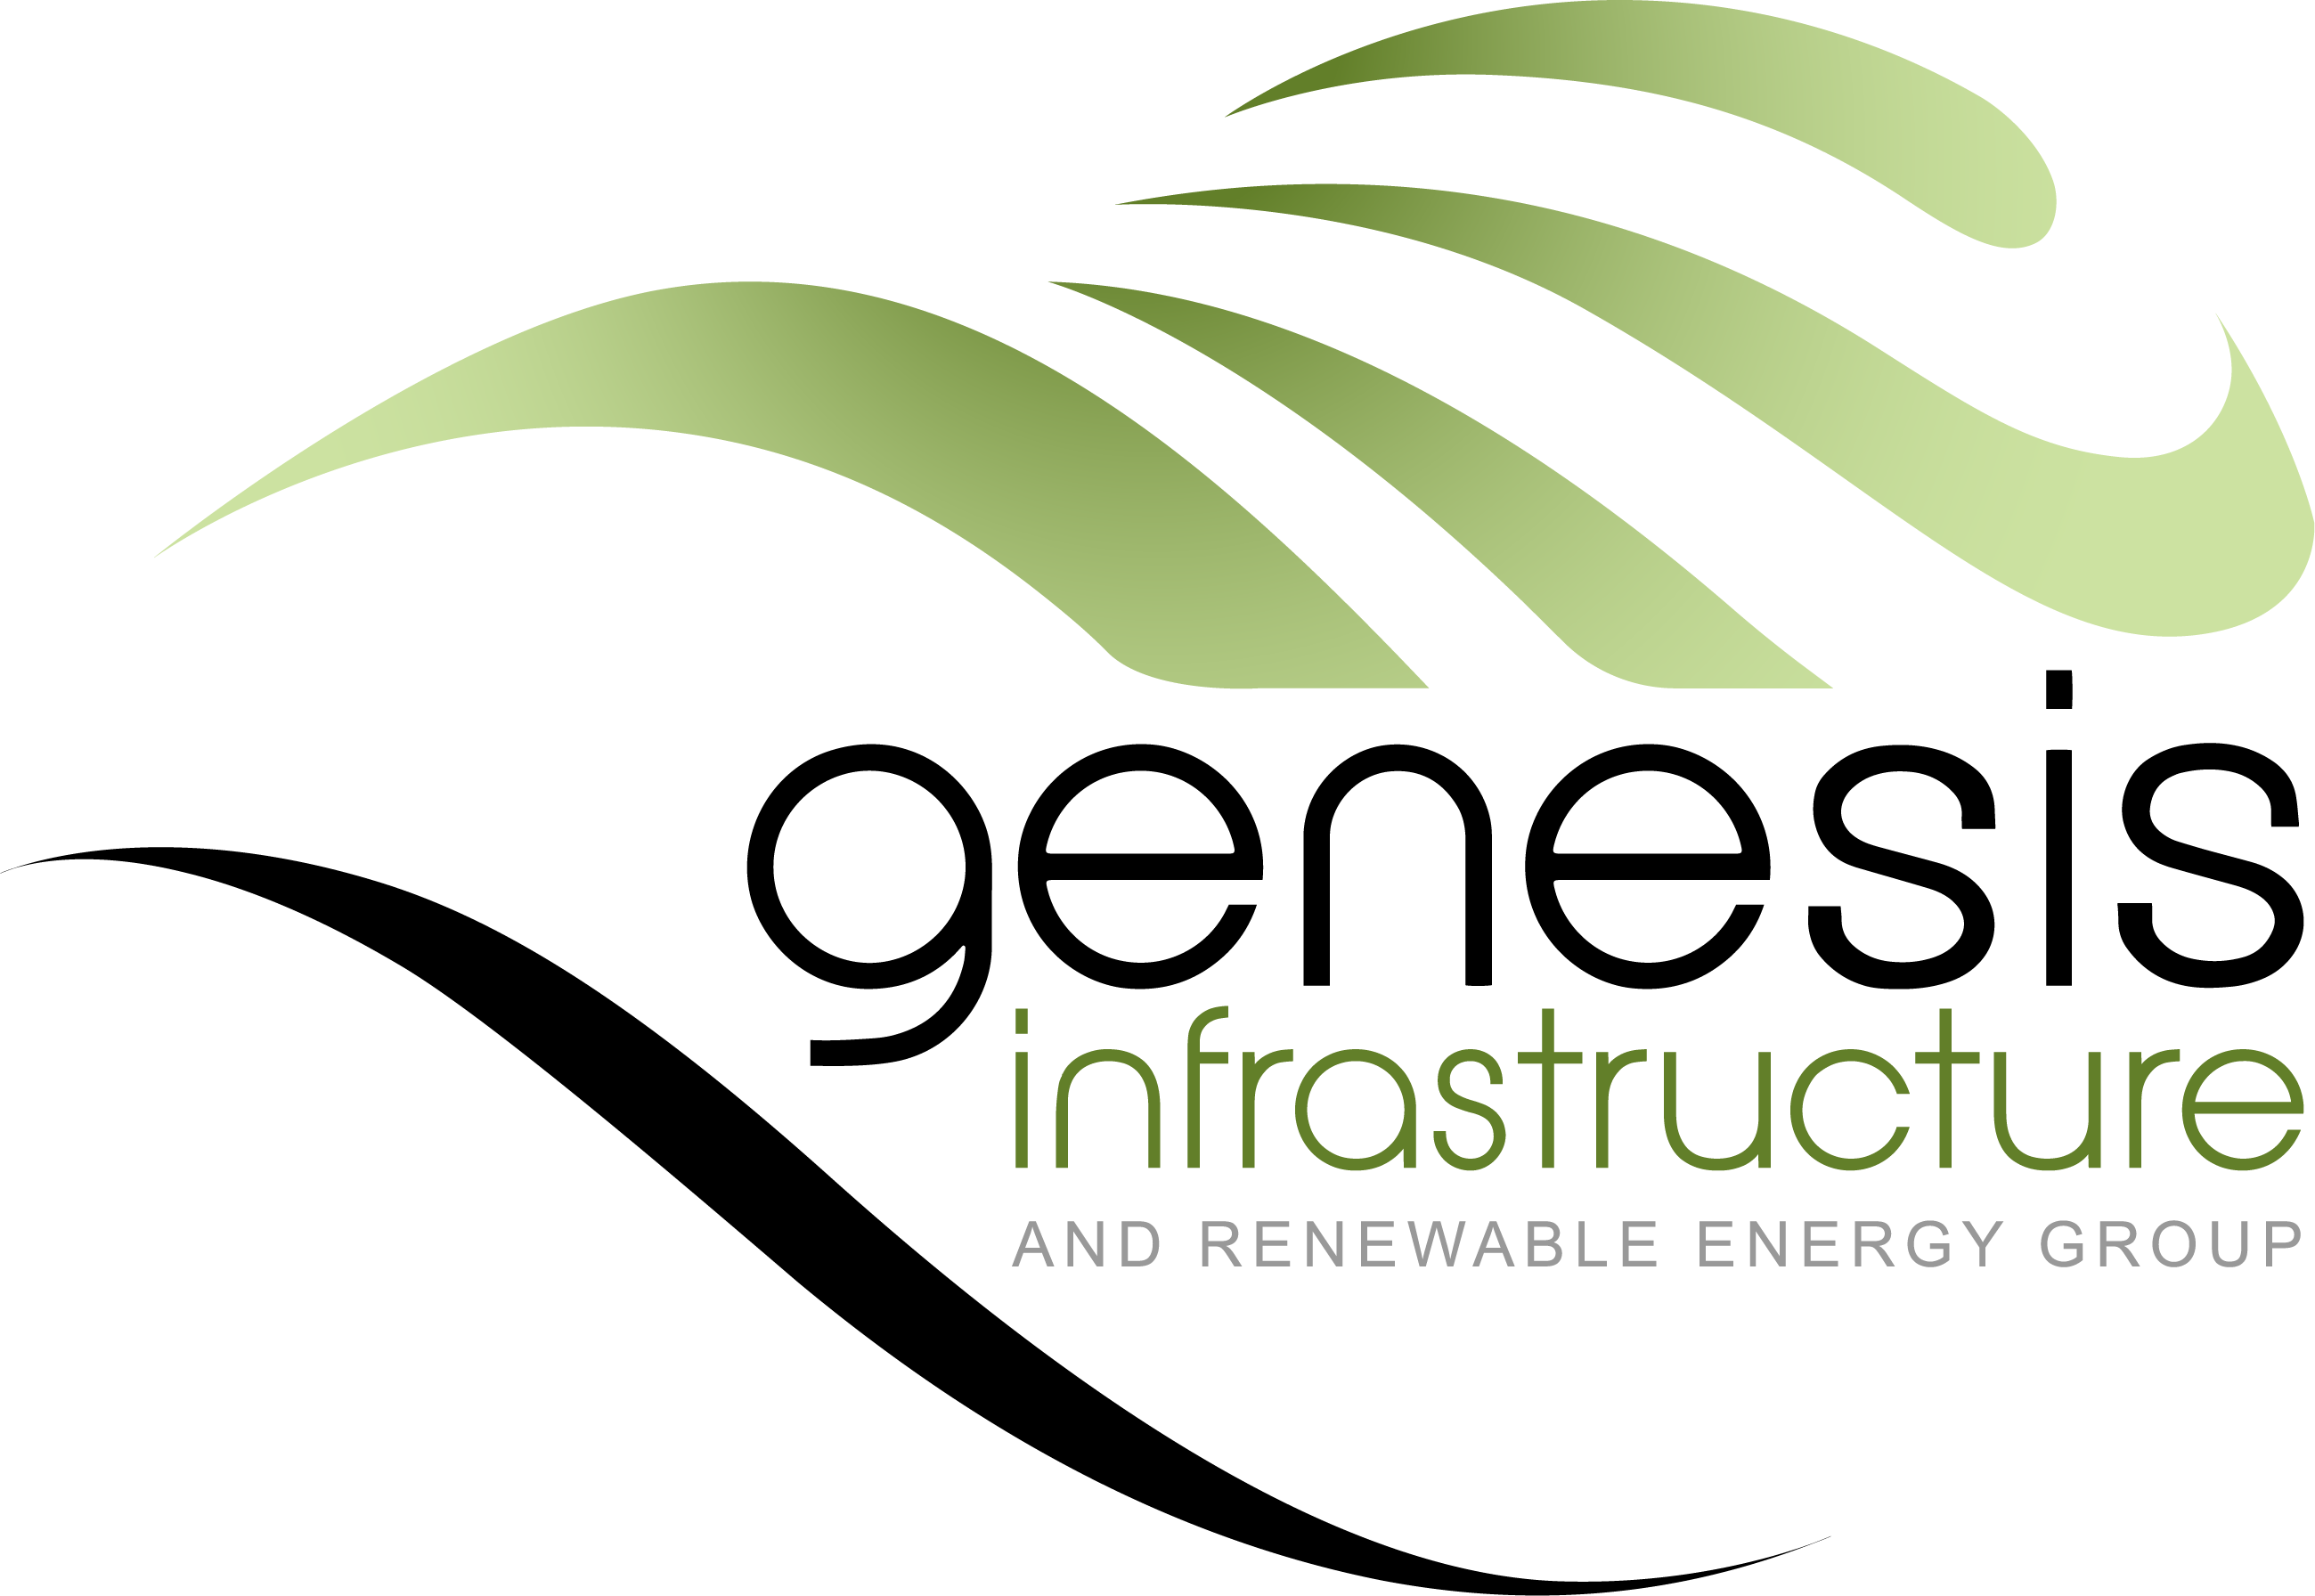 Genesis Infrastructure and Renewable Energy Group